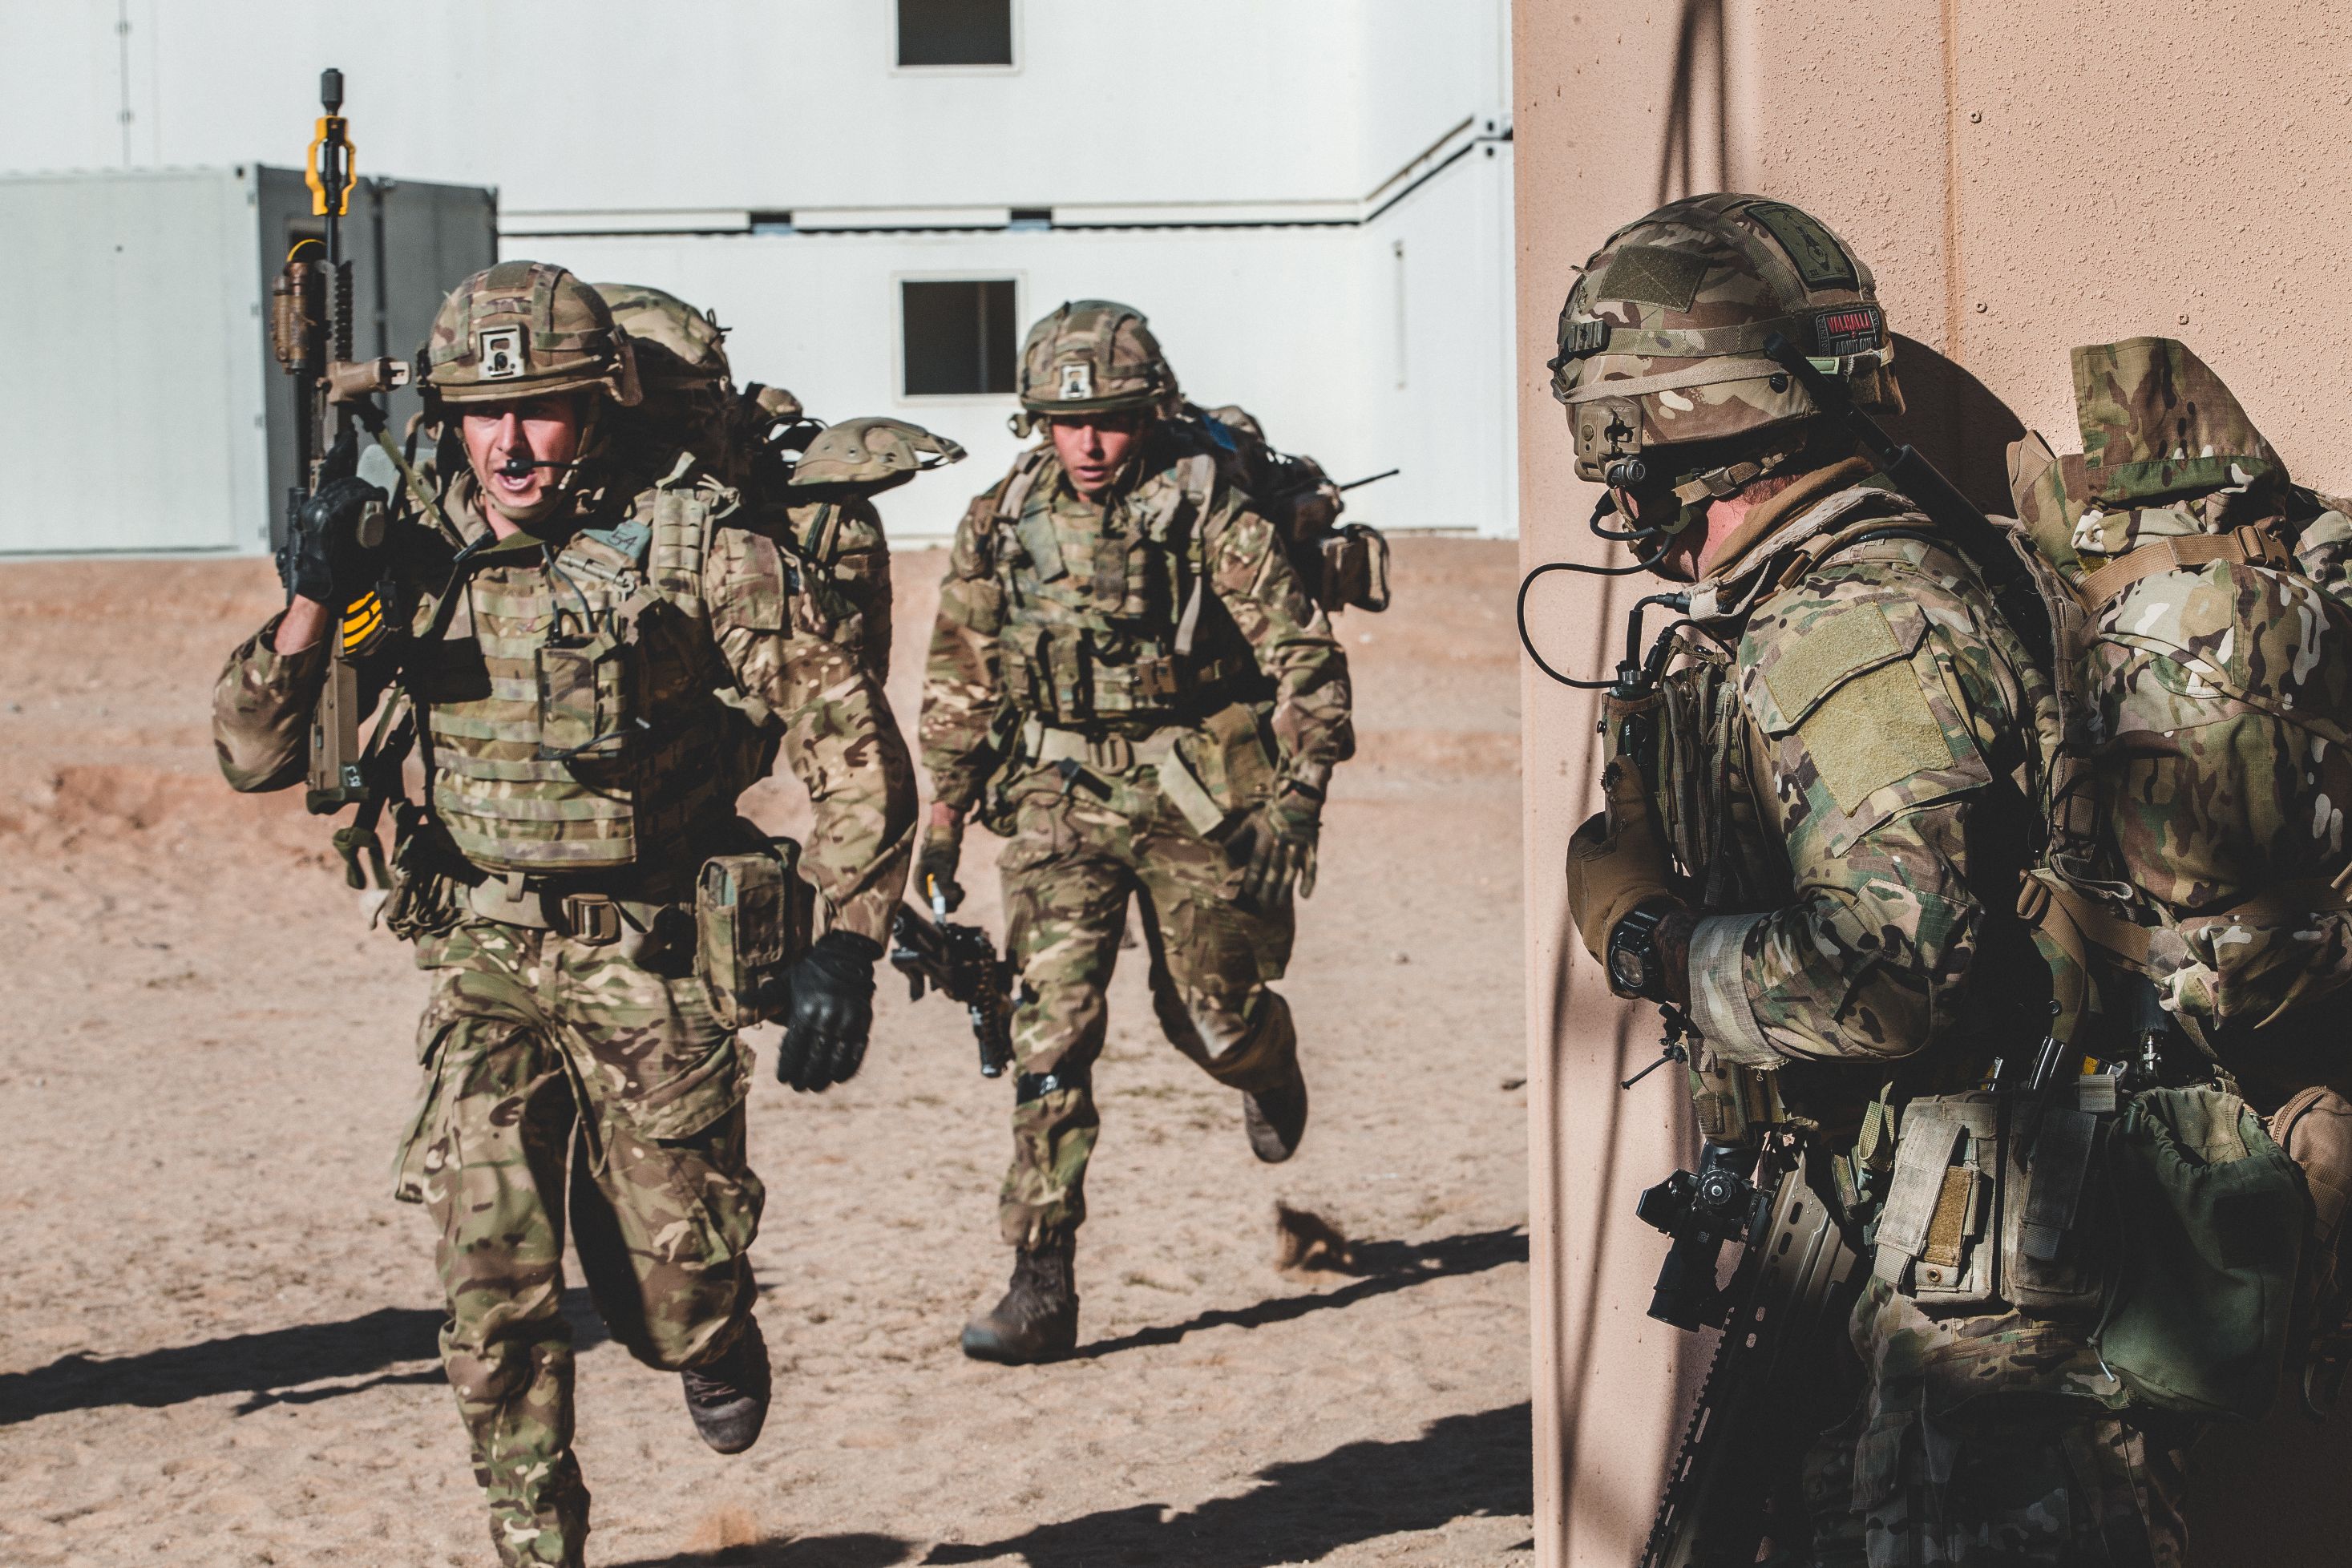 U.K. Royal Marines with 45 Commando take part in Integrated Training Exercise 2-19 at Range 220, Marine Corps Air Ground Combat Center, Twentynine Palms, Calif. Jan. 27, 2019. ITX creates a challenging, realistic training environment that produces combat-ready forces capable of operating as an integrated Marine Air Ground Task Force. (U.S. Marine Corps photo by Lance Cpl. Rachel K. Young)